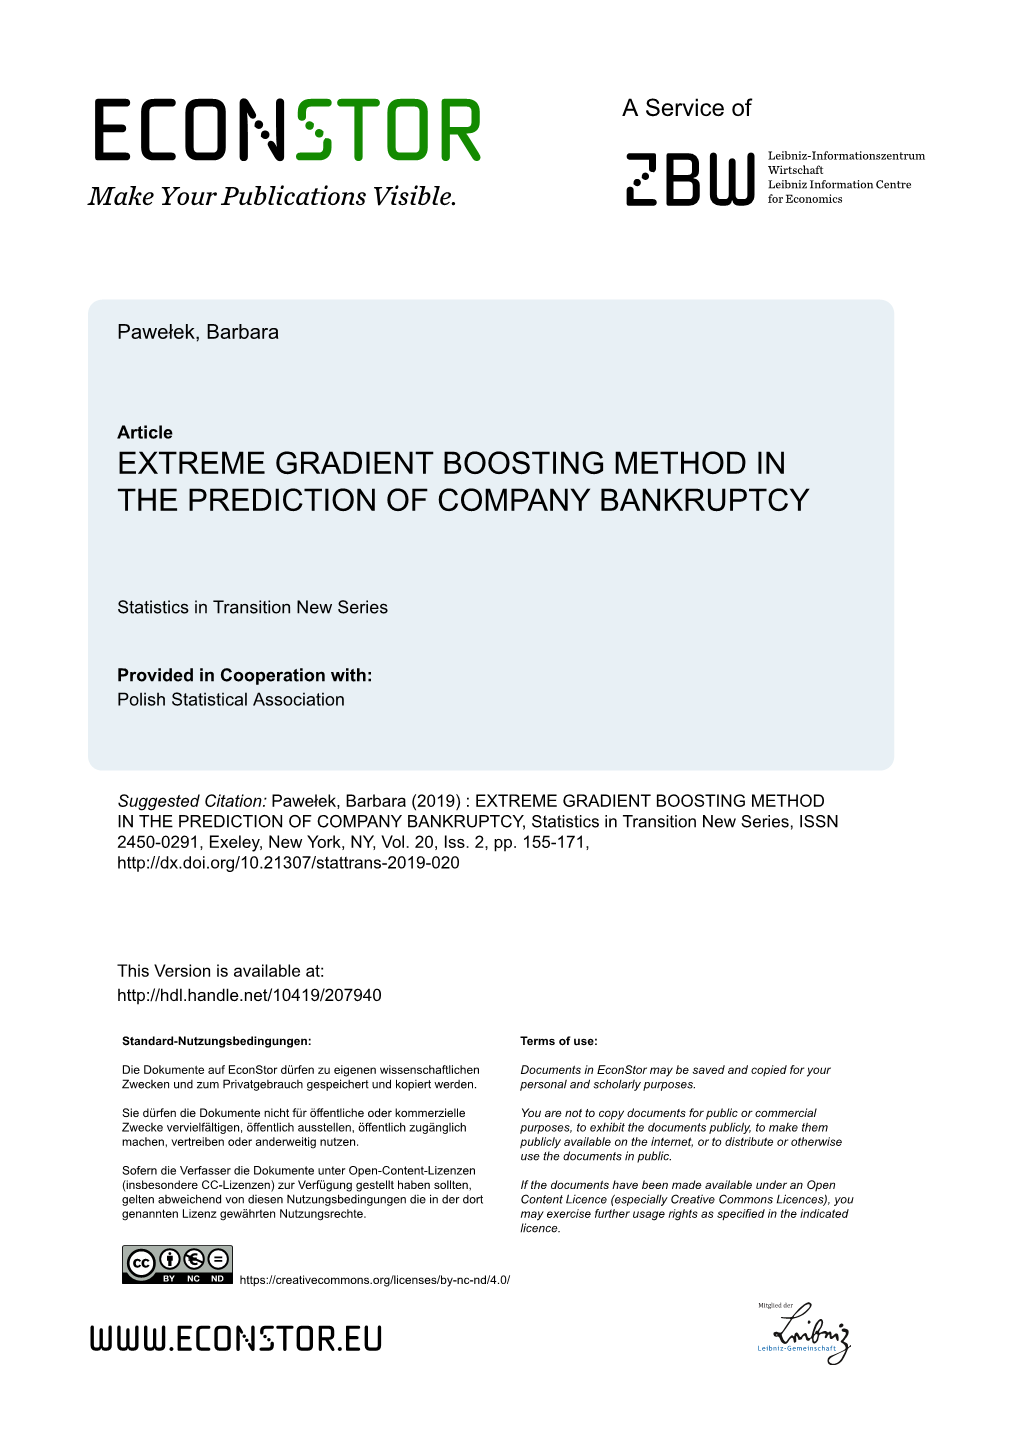 Extreme Gradient Boosting Method in the Prediction of Company Bankruptcy